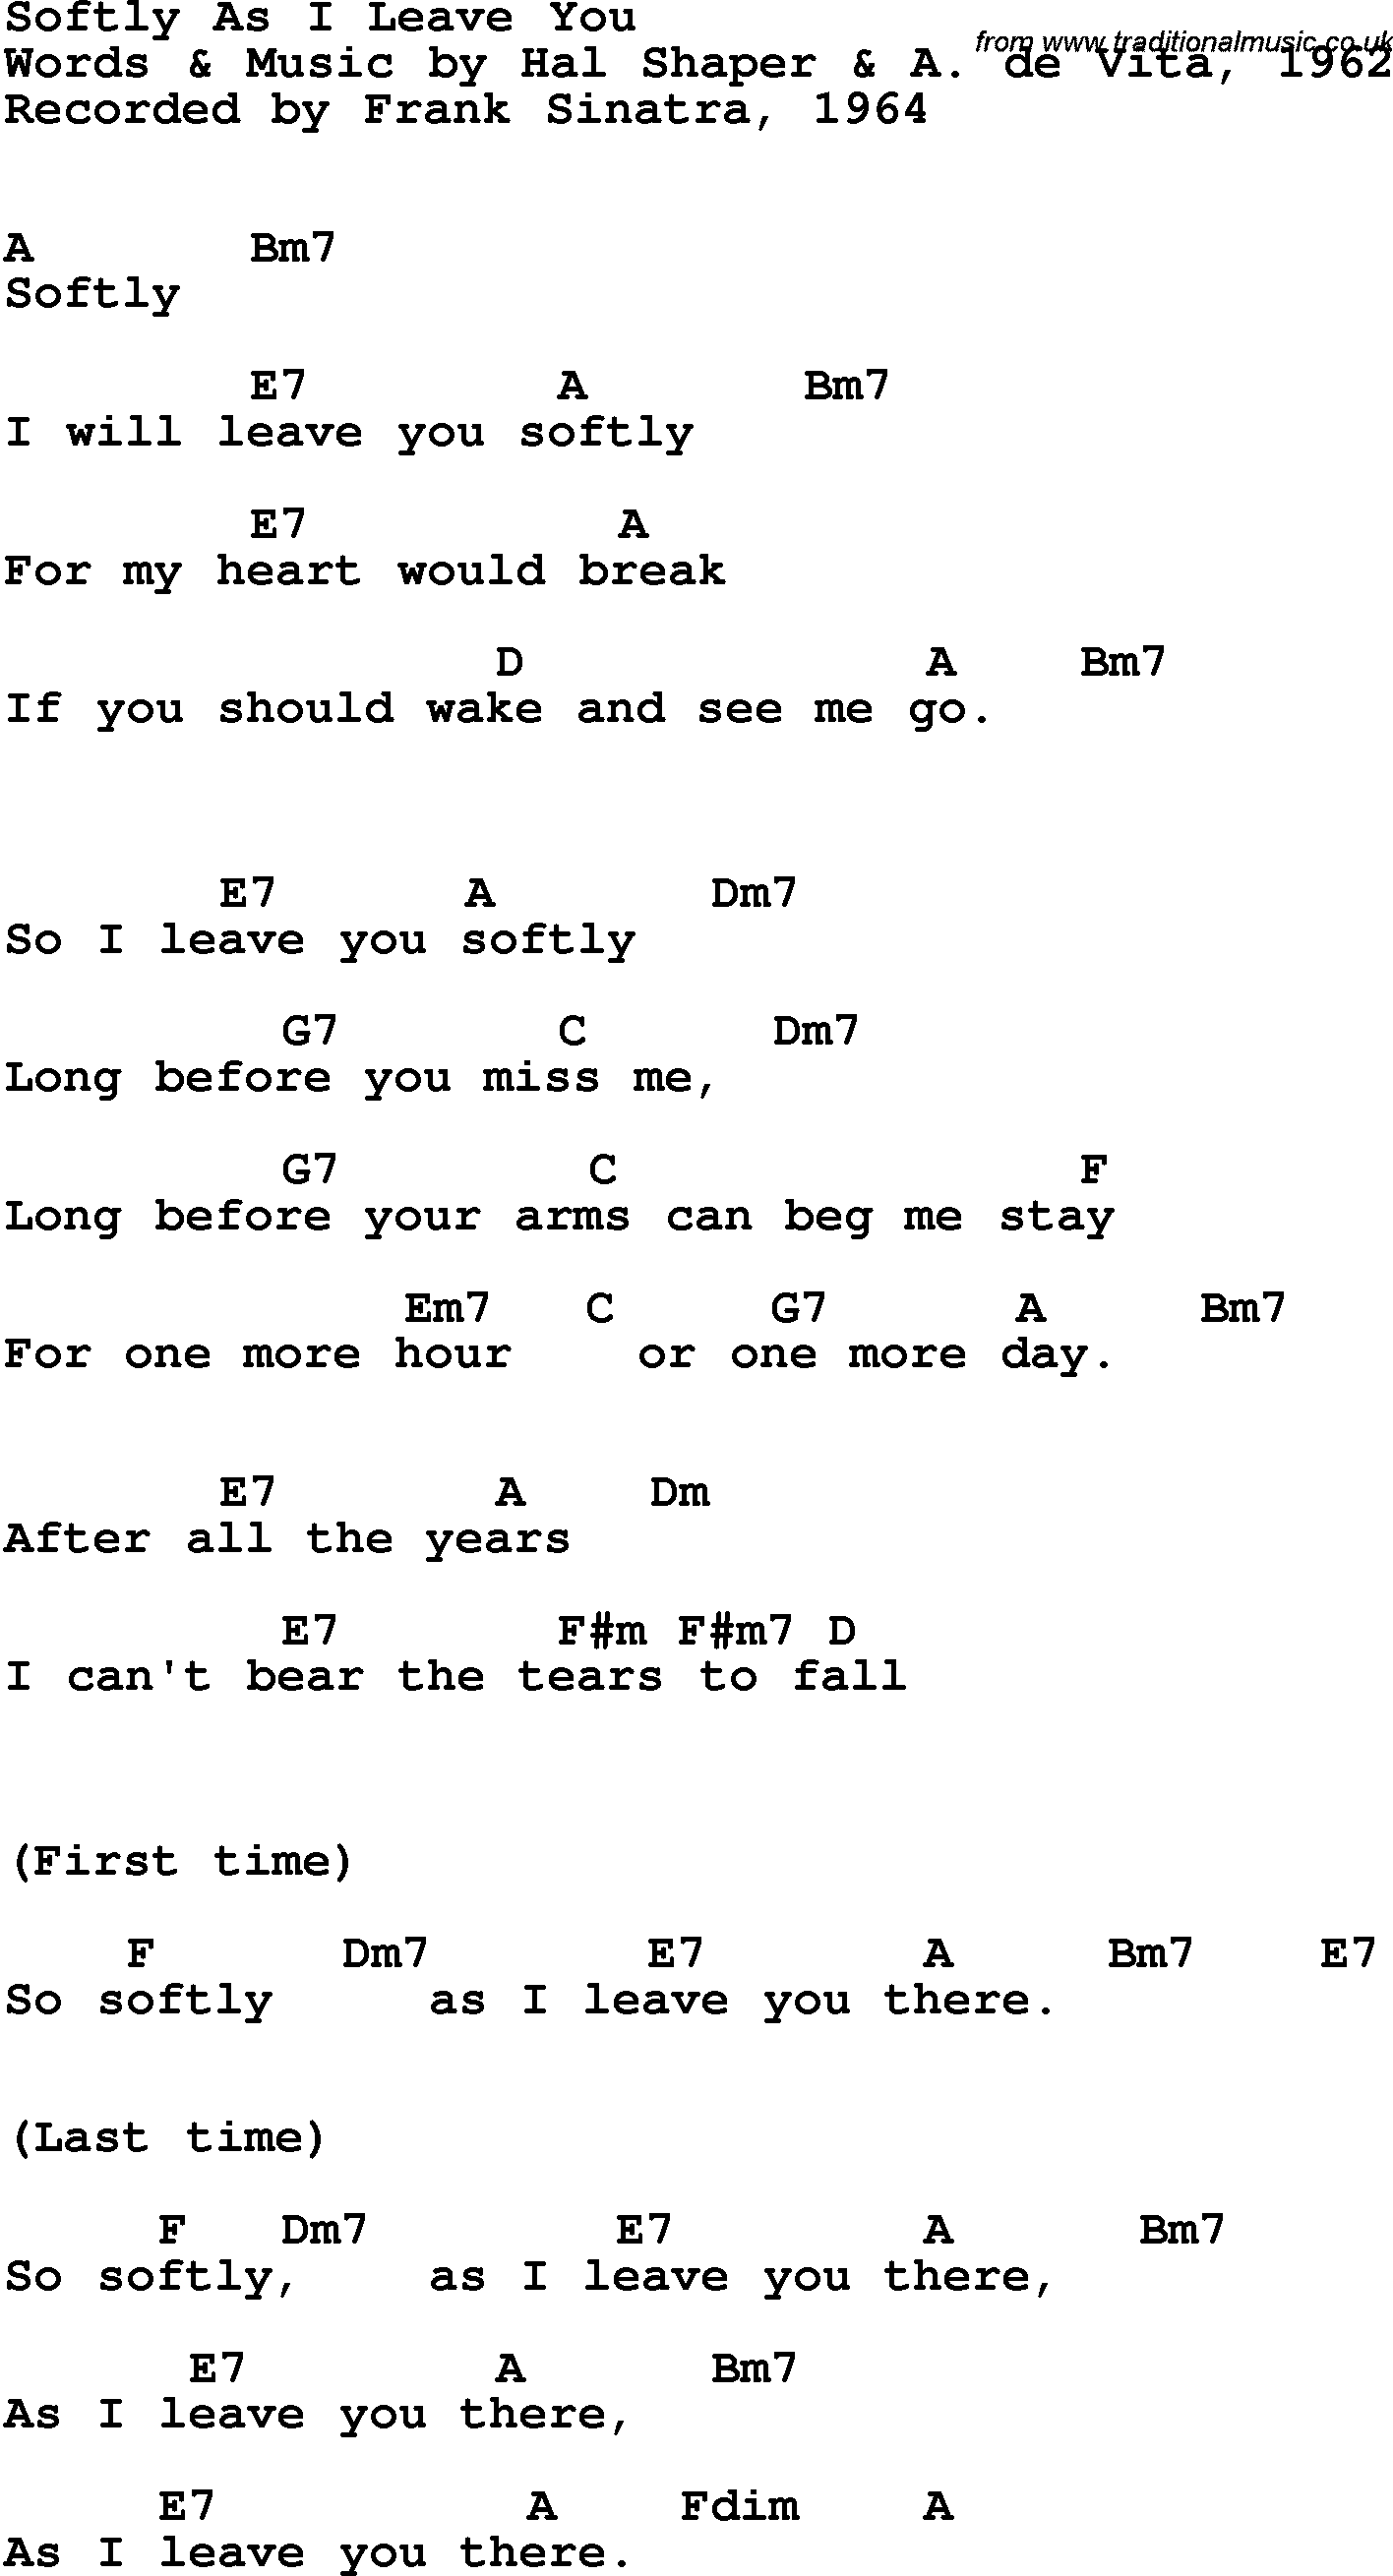 Song Lyrics with guitar chords for Softly As I Leave You - Frank Sinatra, 1964